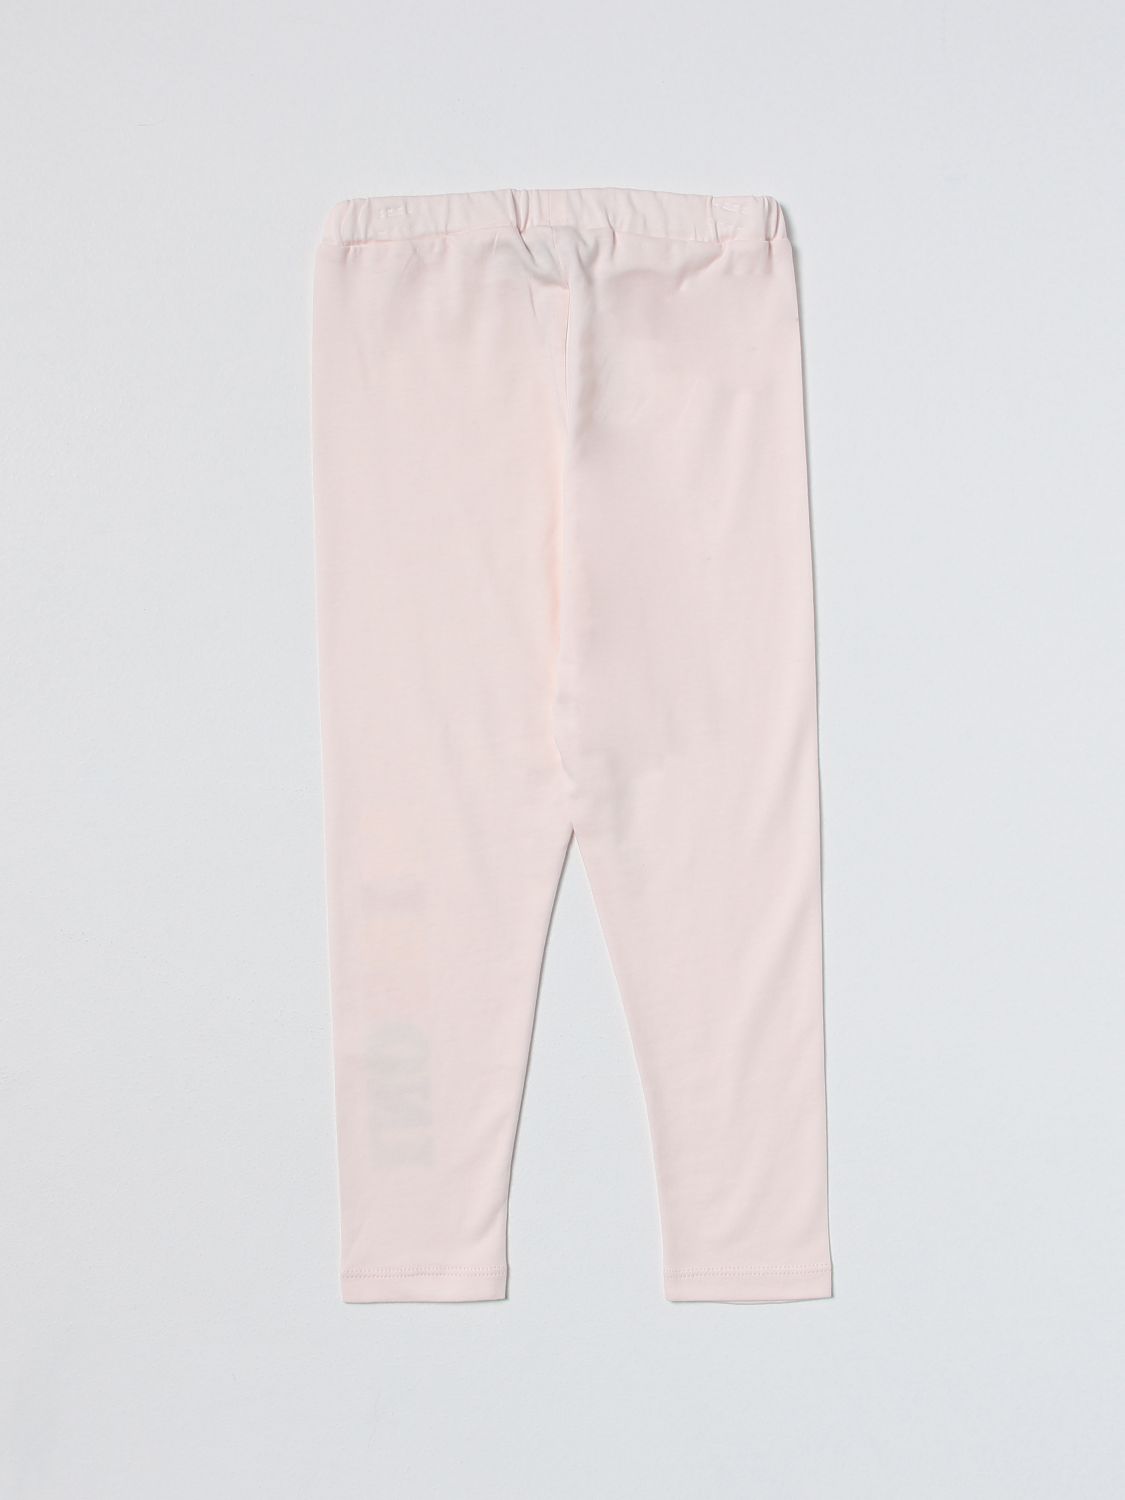 MISSONI: pants for girls - Pink | Missoni pants MS6A40Z1214 online on ...